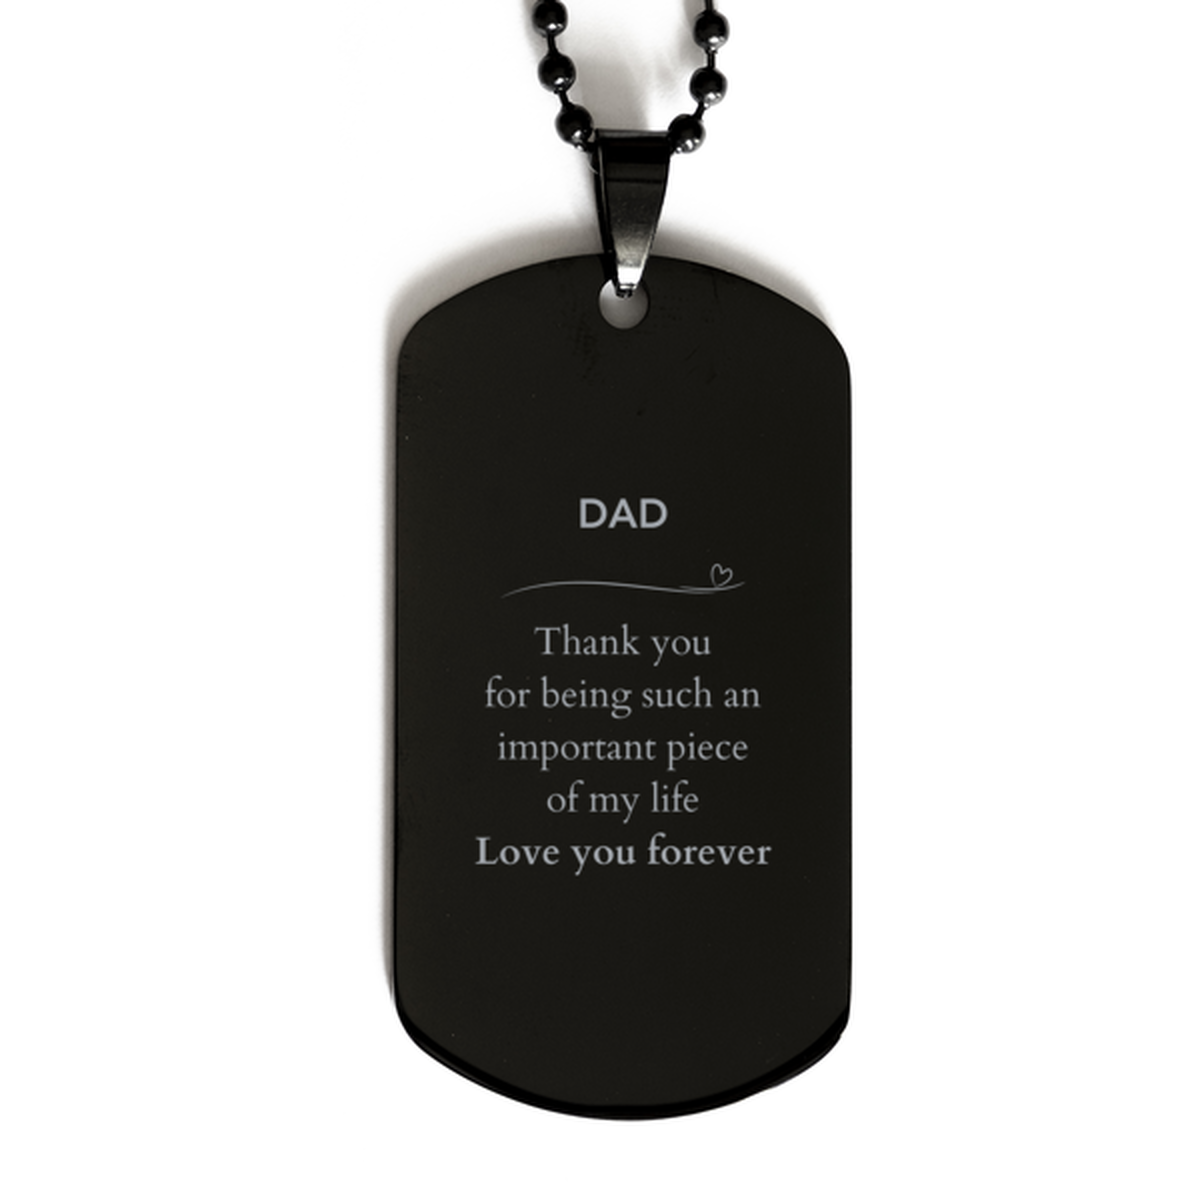 Appropriate Dad Black Dog Tag Epic Birthday Gifts for Dad Thank you for being such an important piece of my life Dad Christmas Mothers Fathers Day